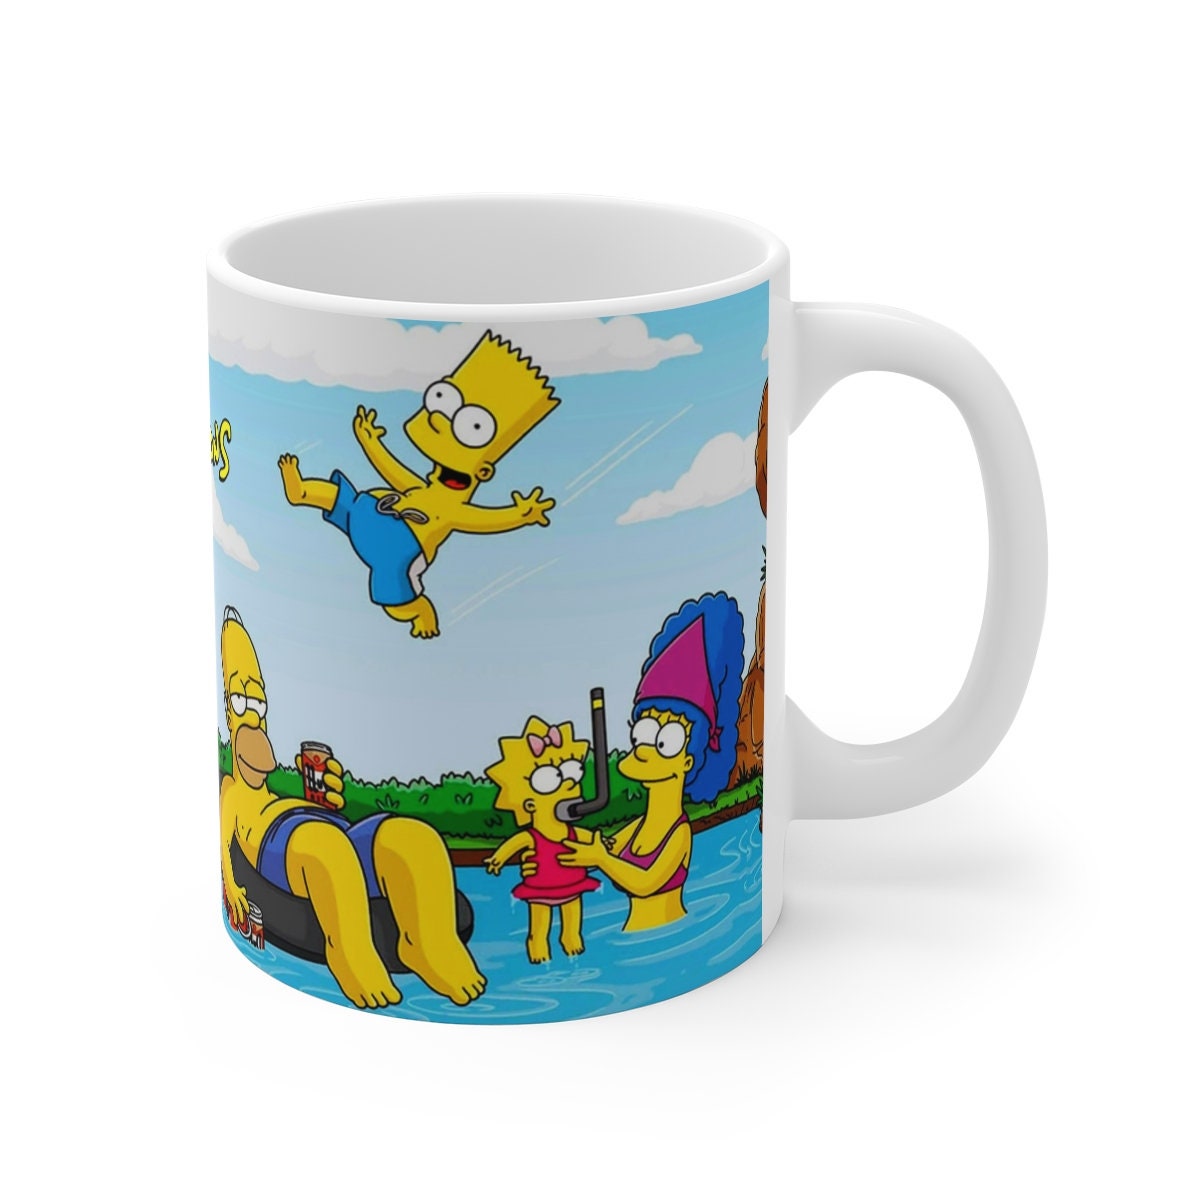 il fullxfull.4360103040 alxc 1 - The Simpsons Shop